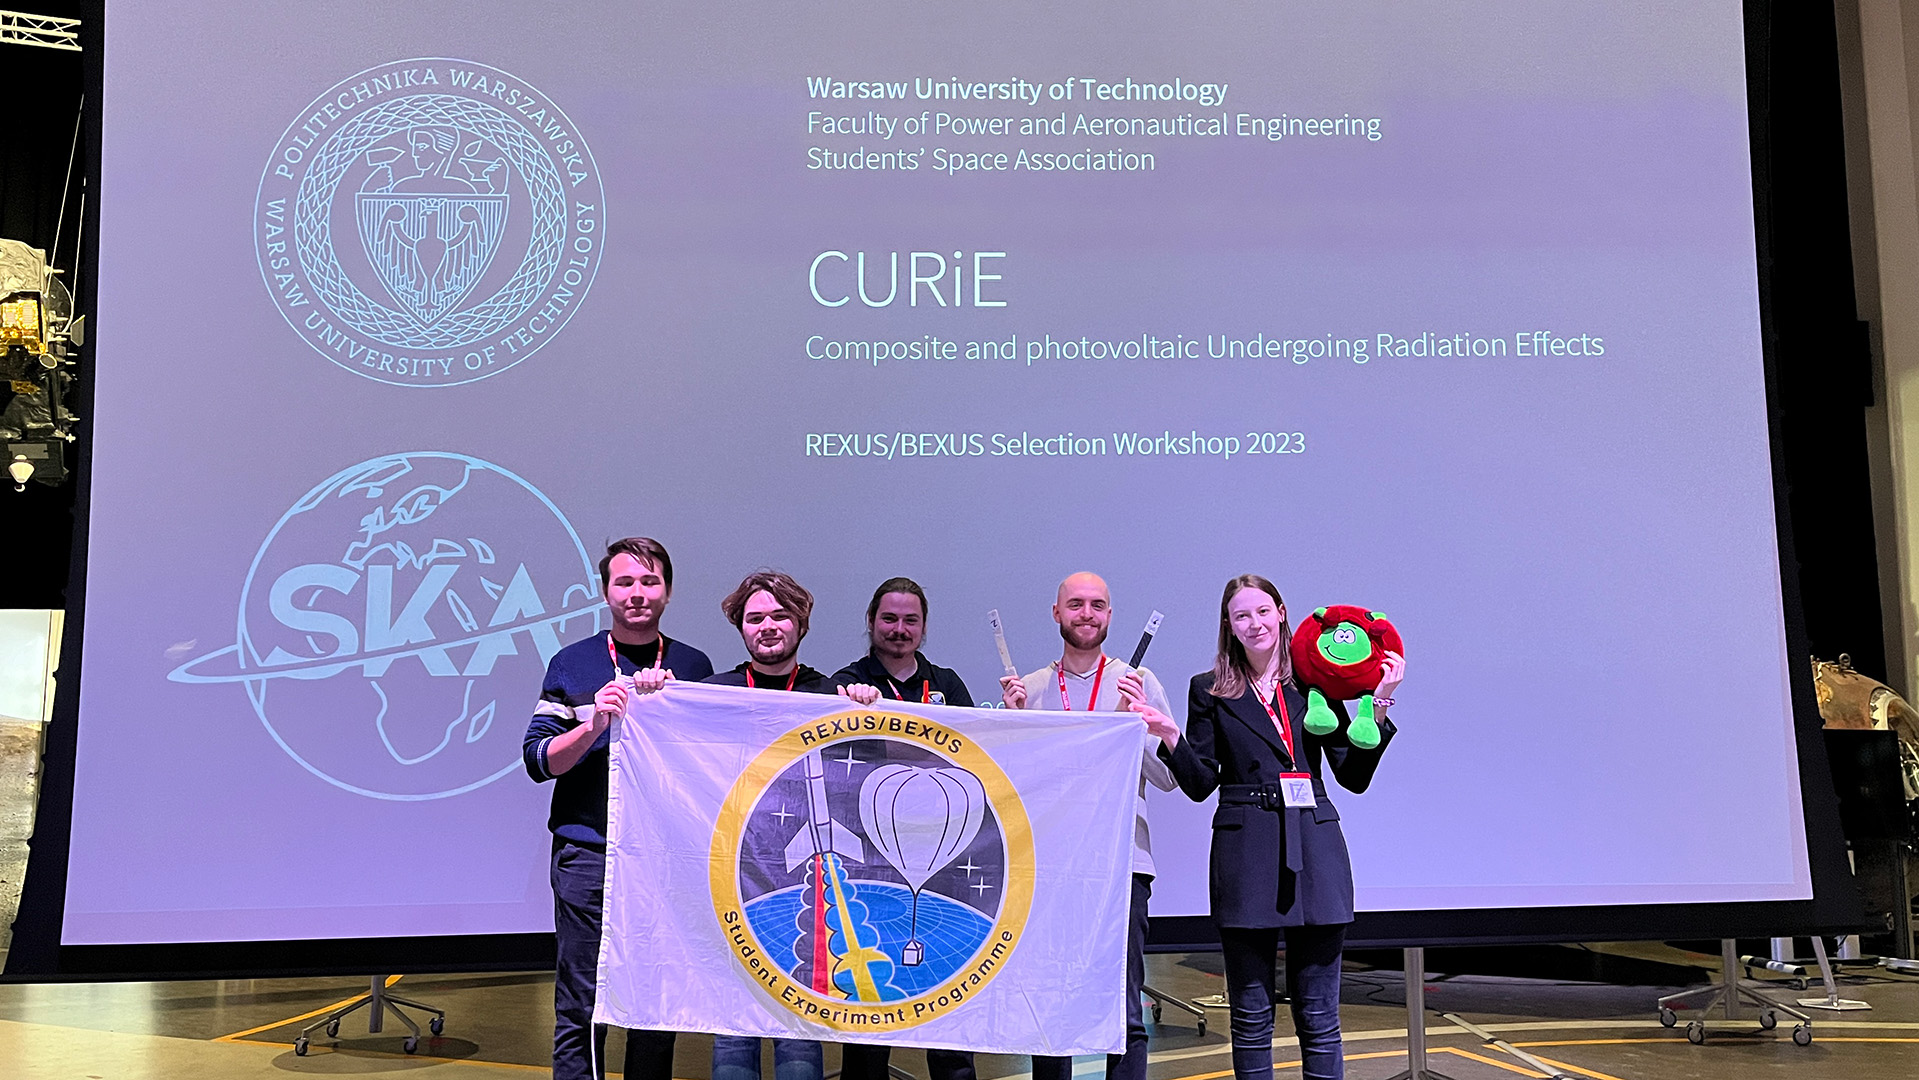 Part of the CURiE team against the background of a project presentation screen